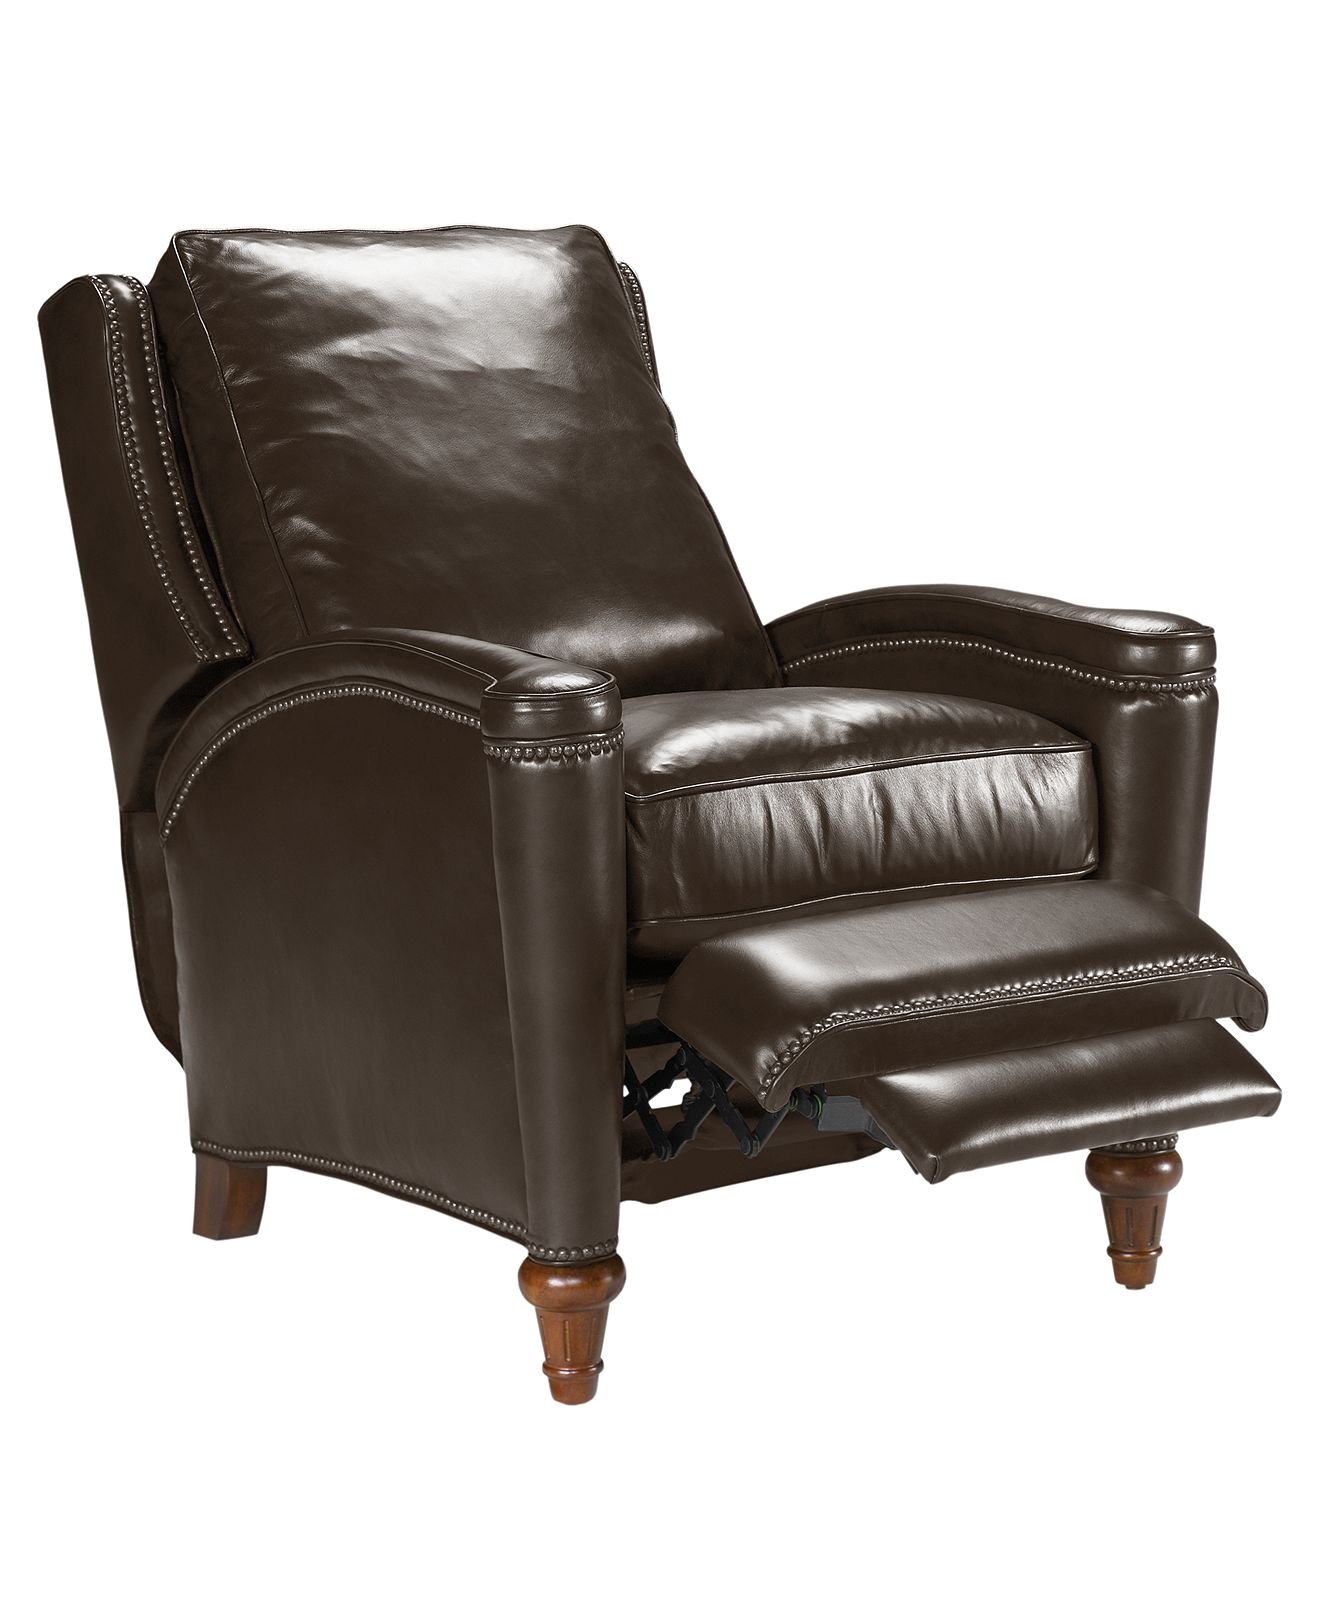 Macys Leather Chair Recliner Rutherford Leather Recliner Chair Recliners Furniture Macy S